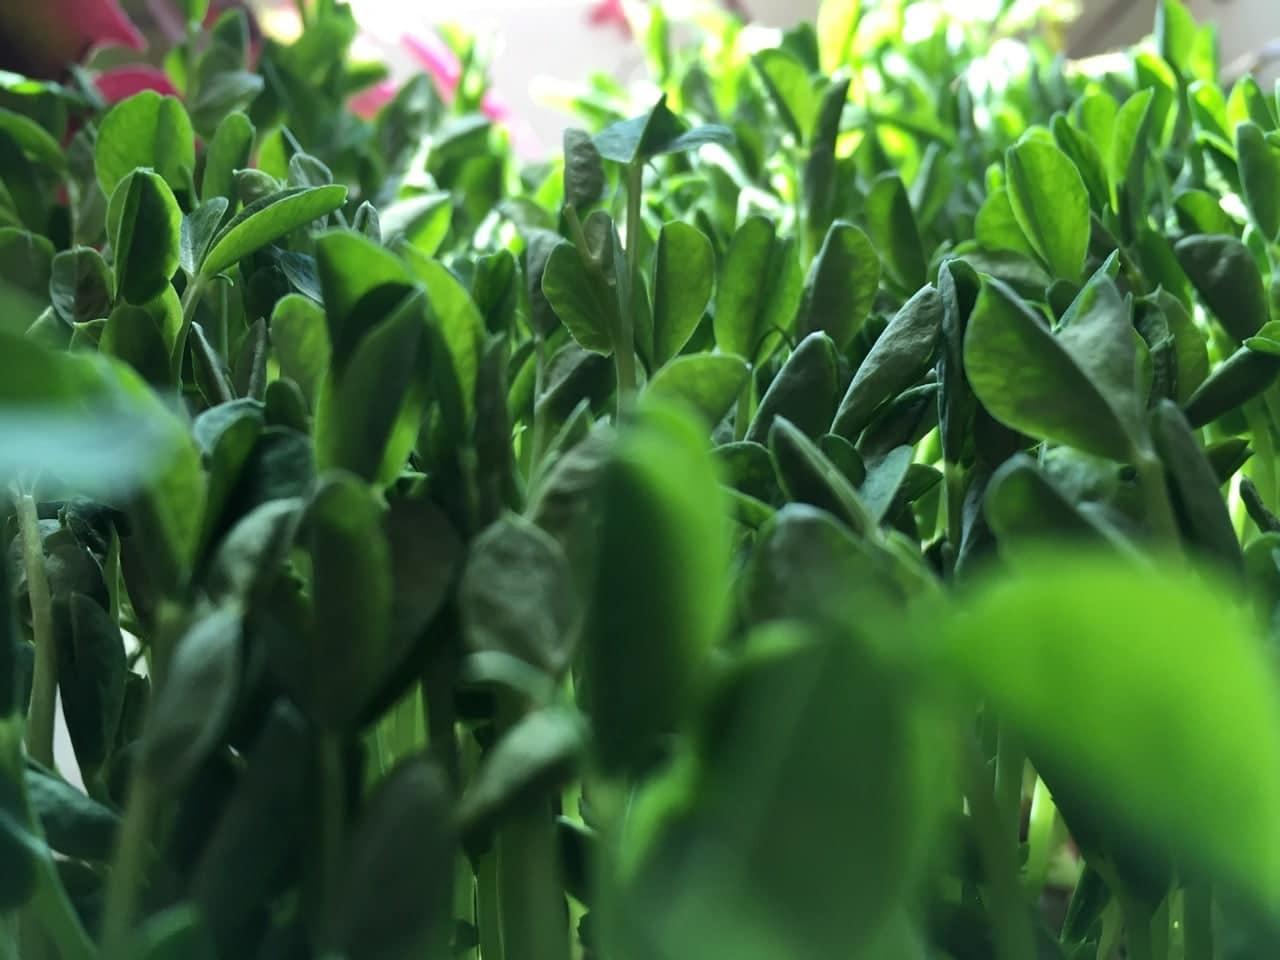 Greens in the greenhouse - confirmed